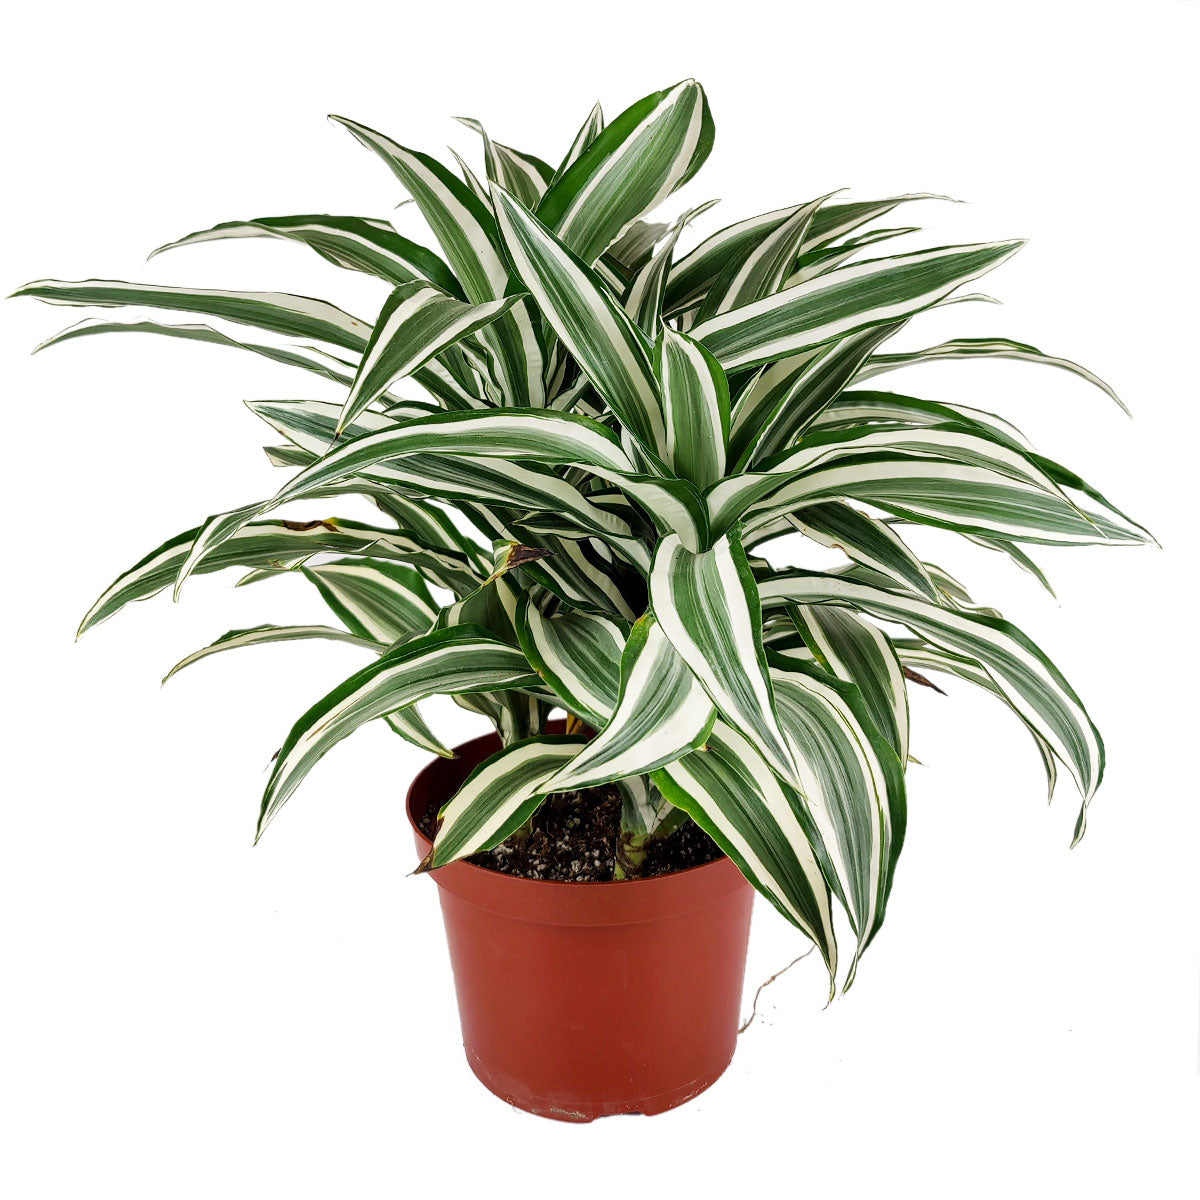 Dracaena Warneckii, Dracaena deremensis, popular houseplant for home and office, low light houseplant, best air-purifying plant 